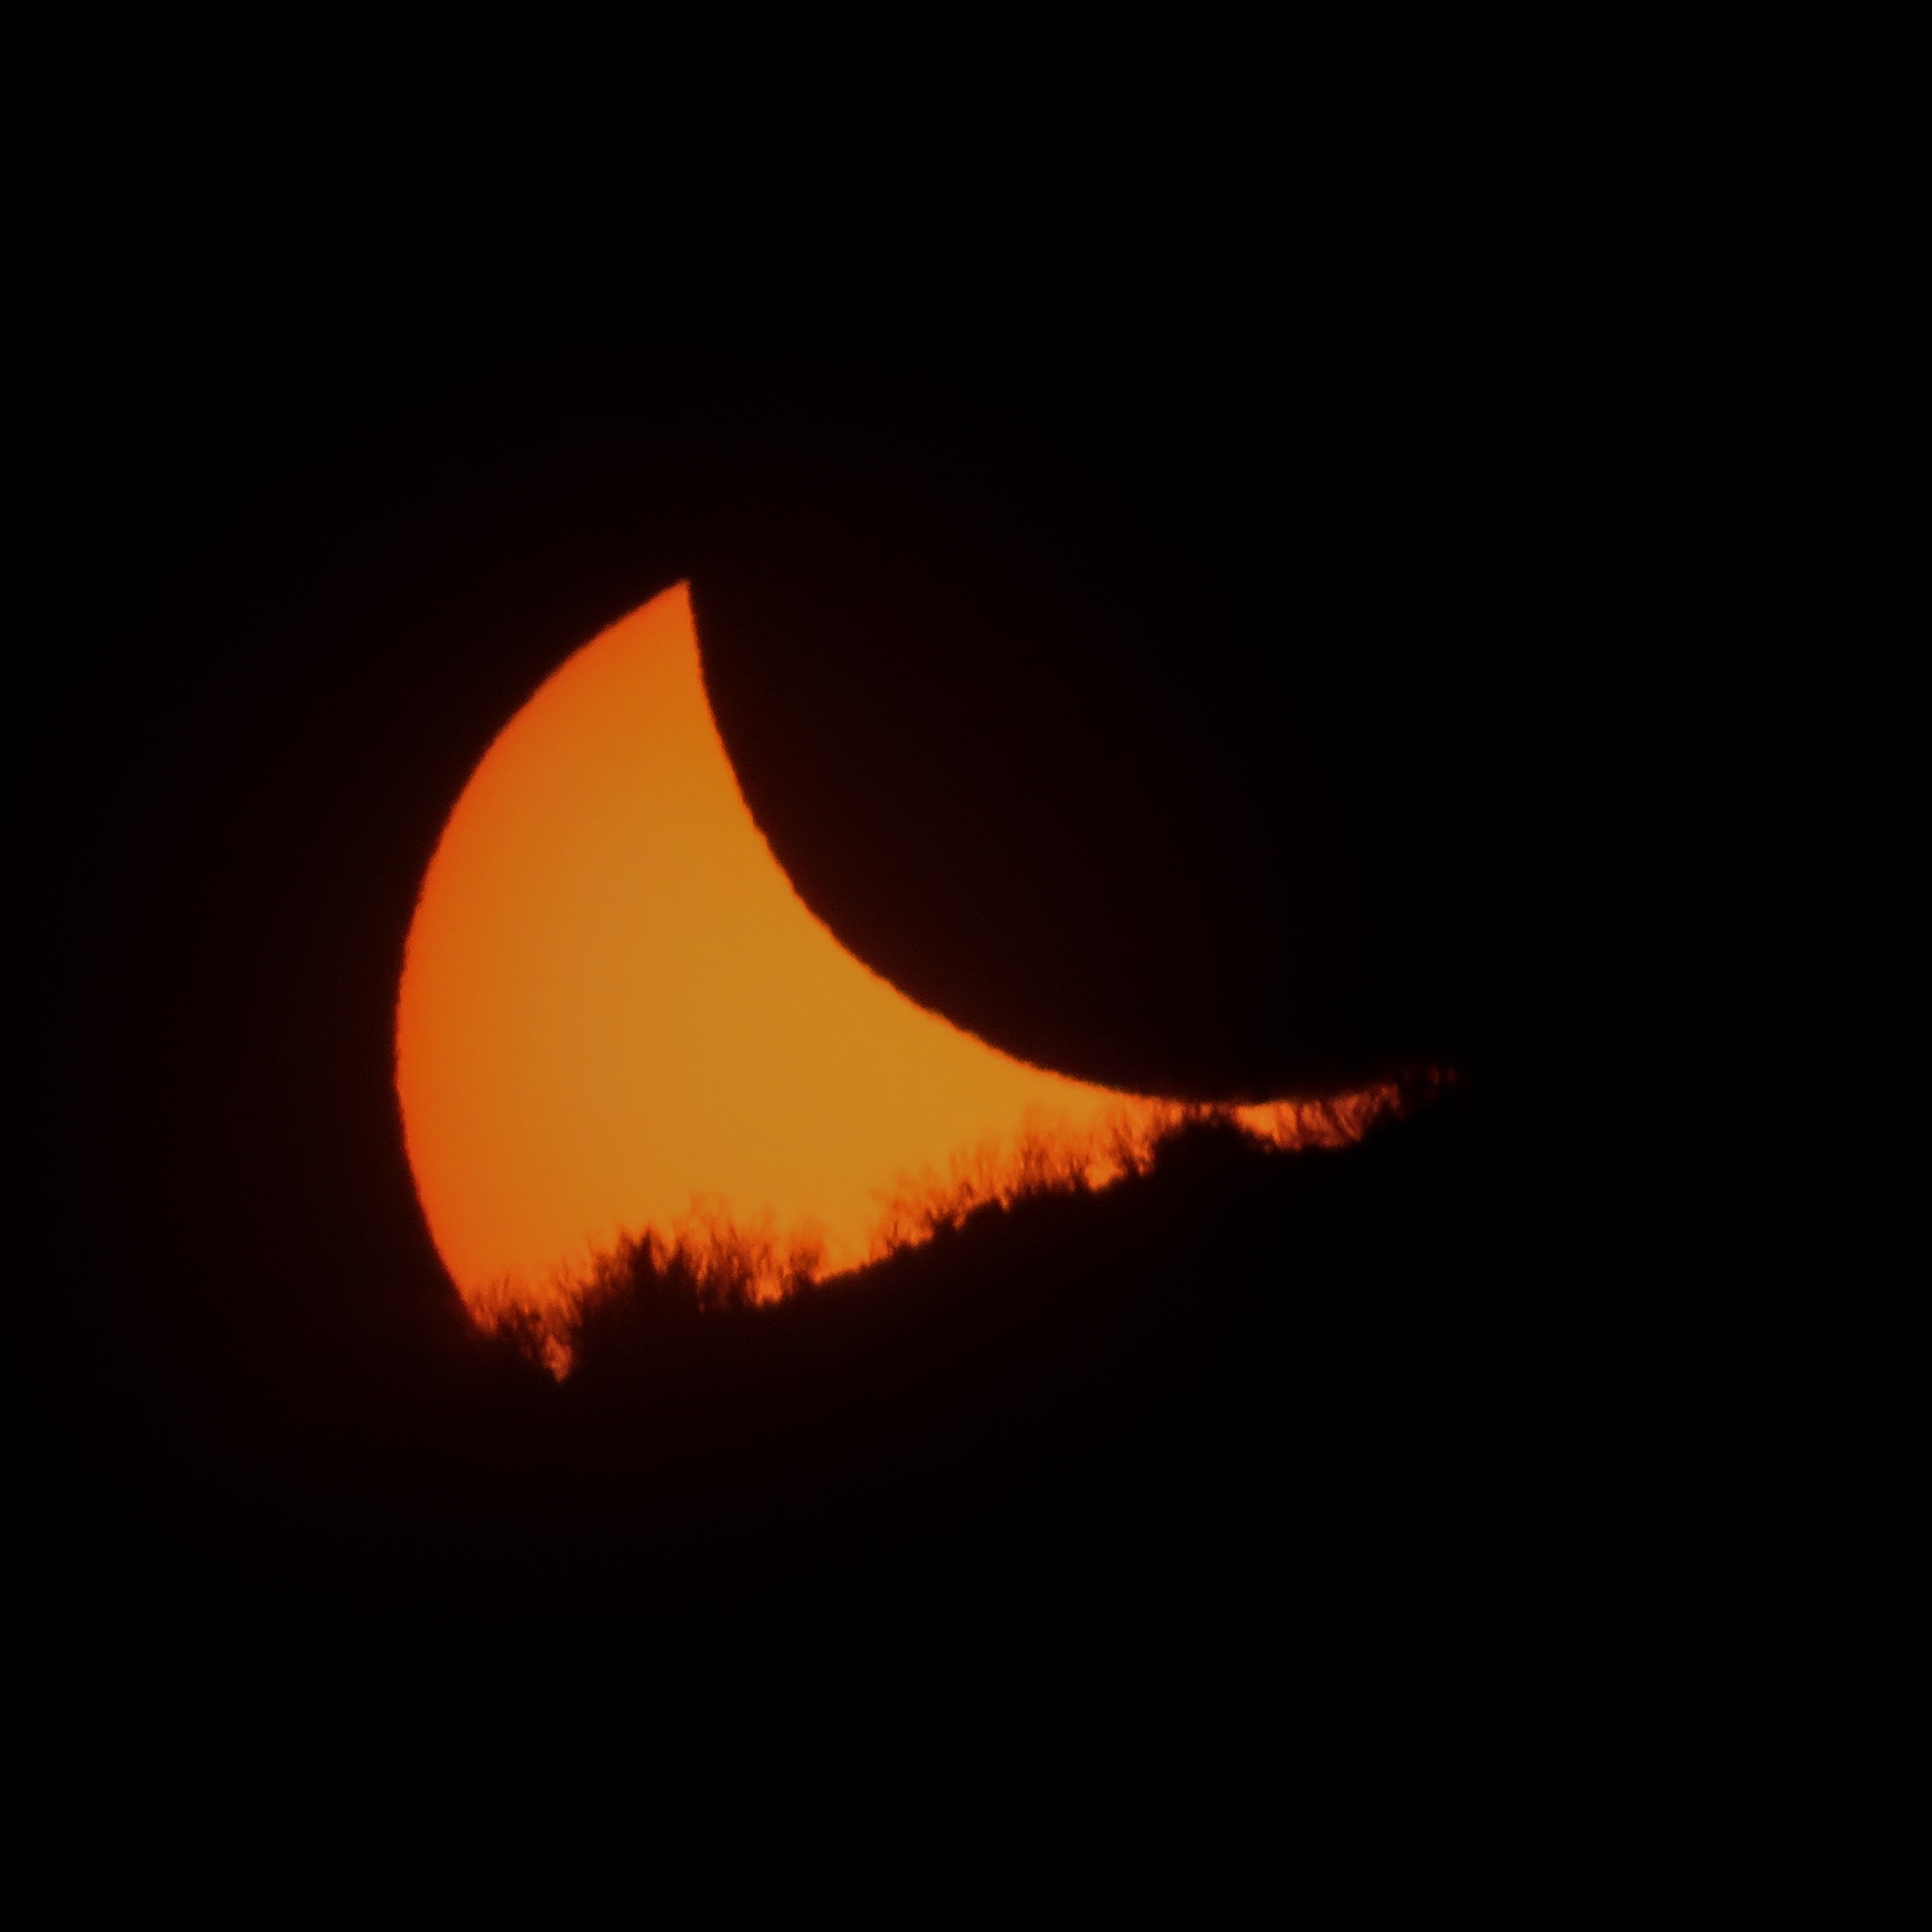 the sunset aligned with the end of the July 2, 2019 solar eclipse (Vicuña, Chile)